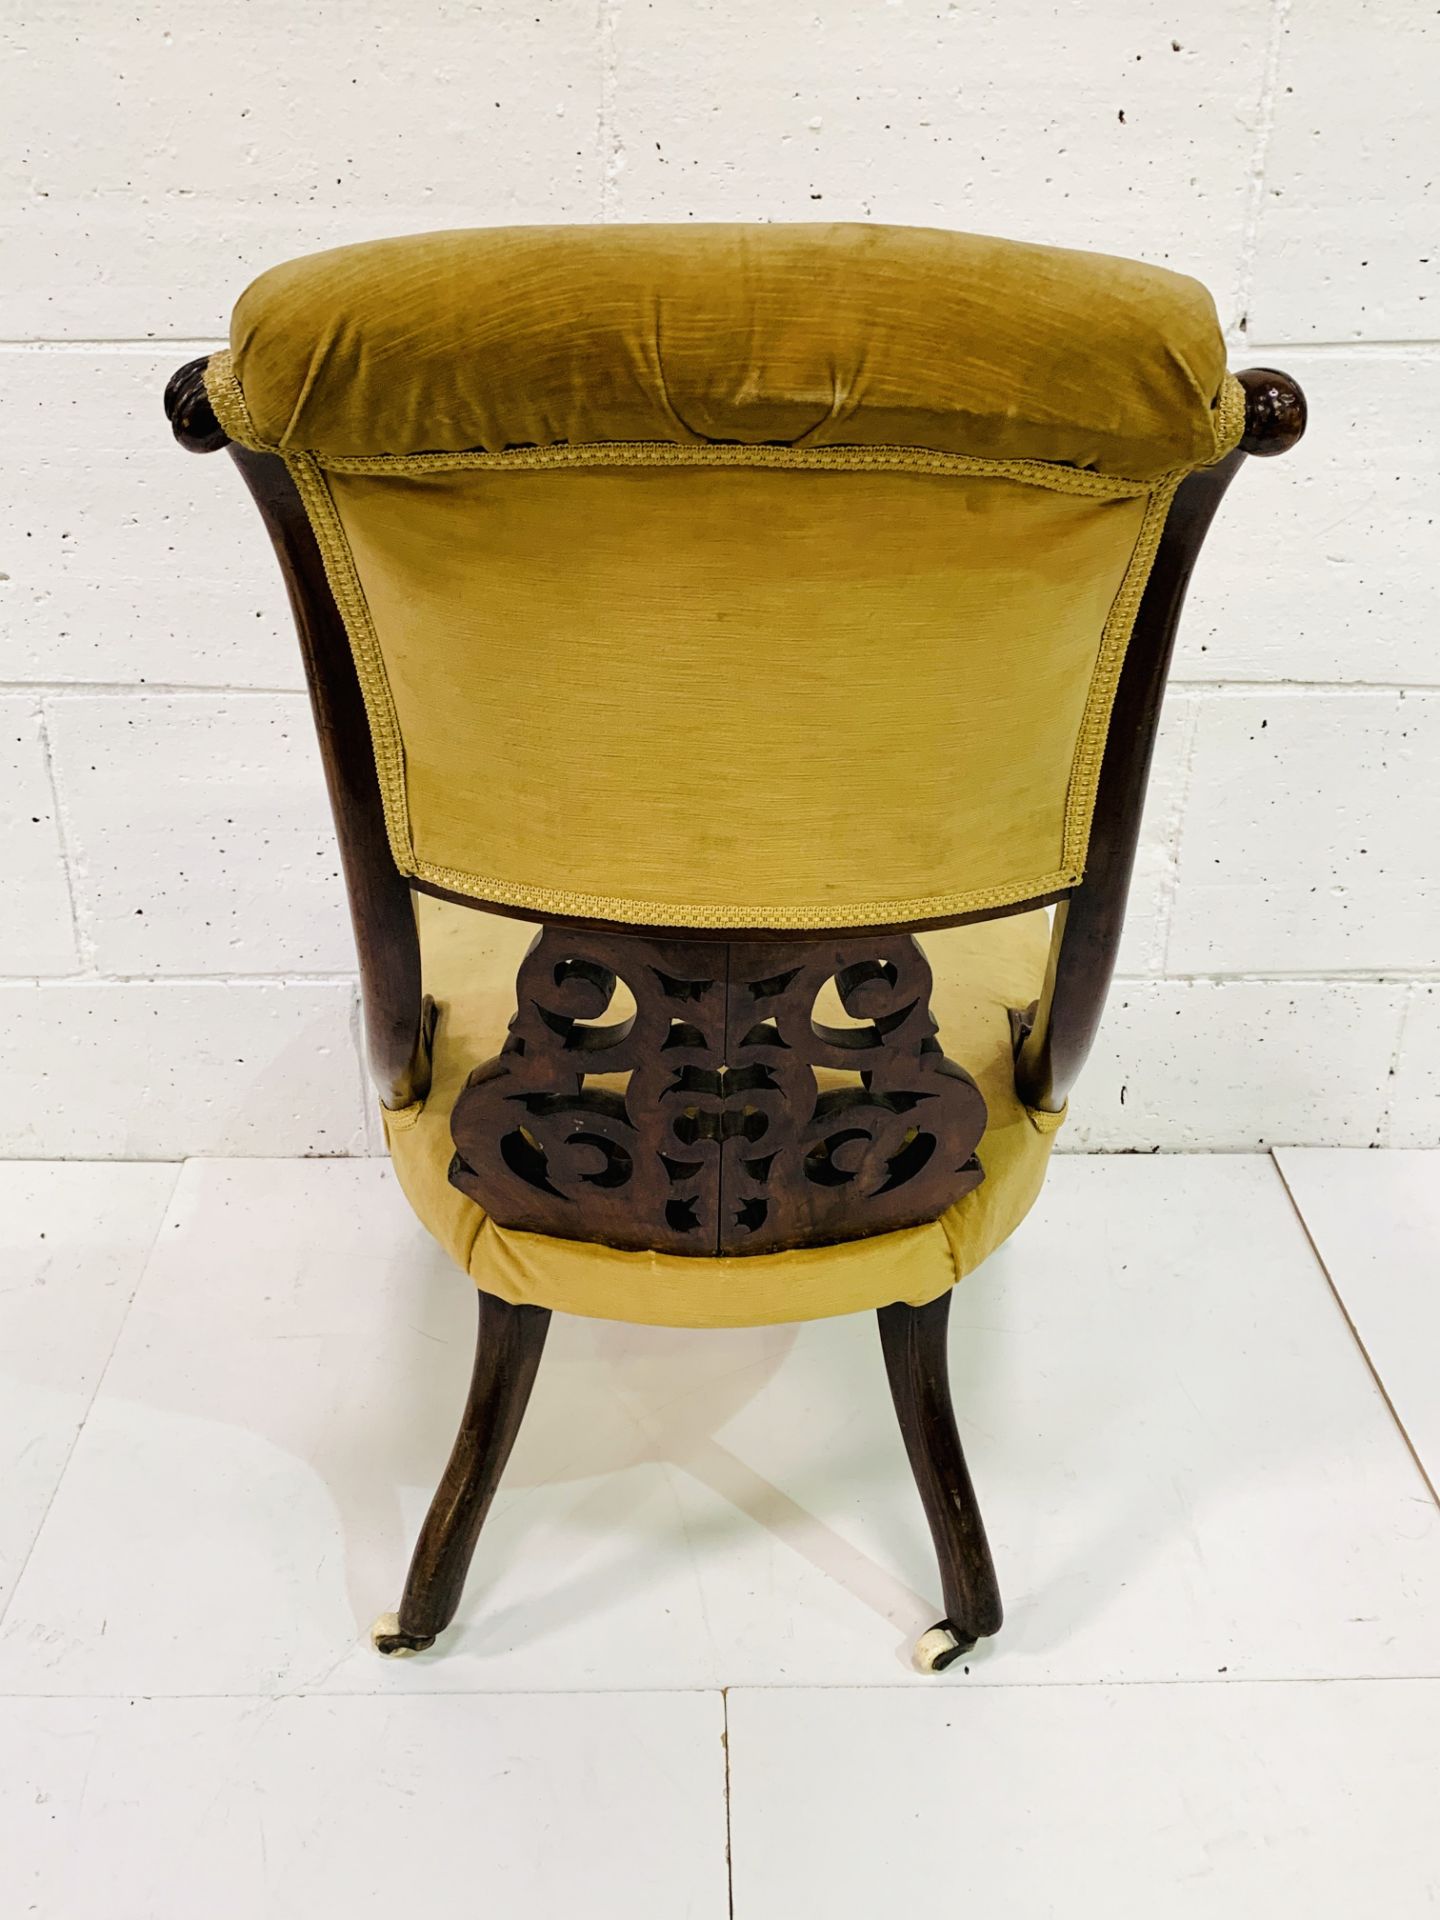 Ornately decorated mahogany framed drawing room chair with buttoned back mustard upholstrey. - Image 5 of 5